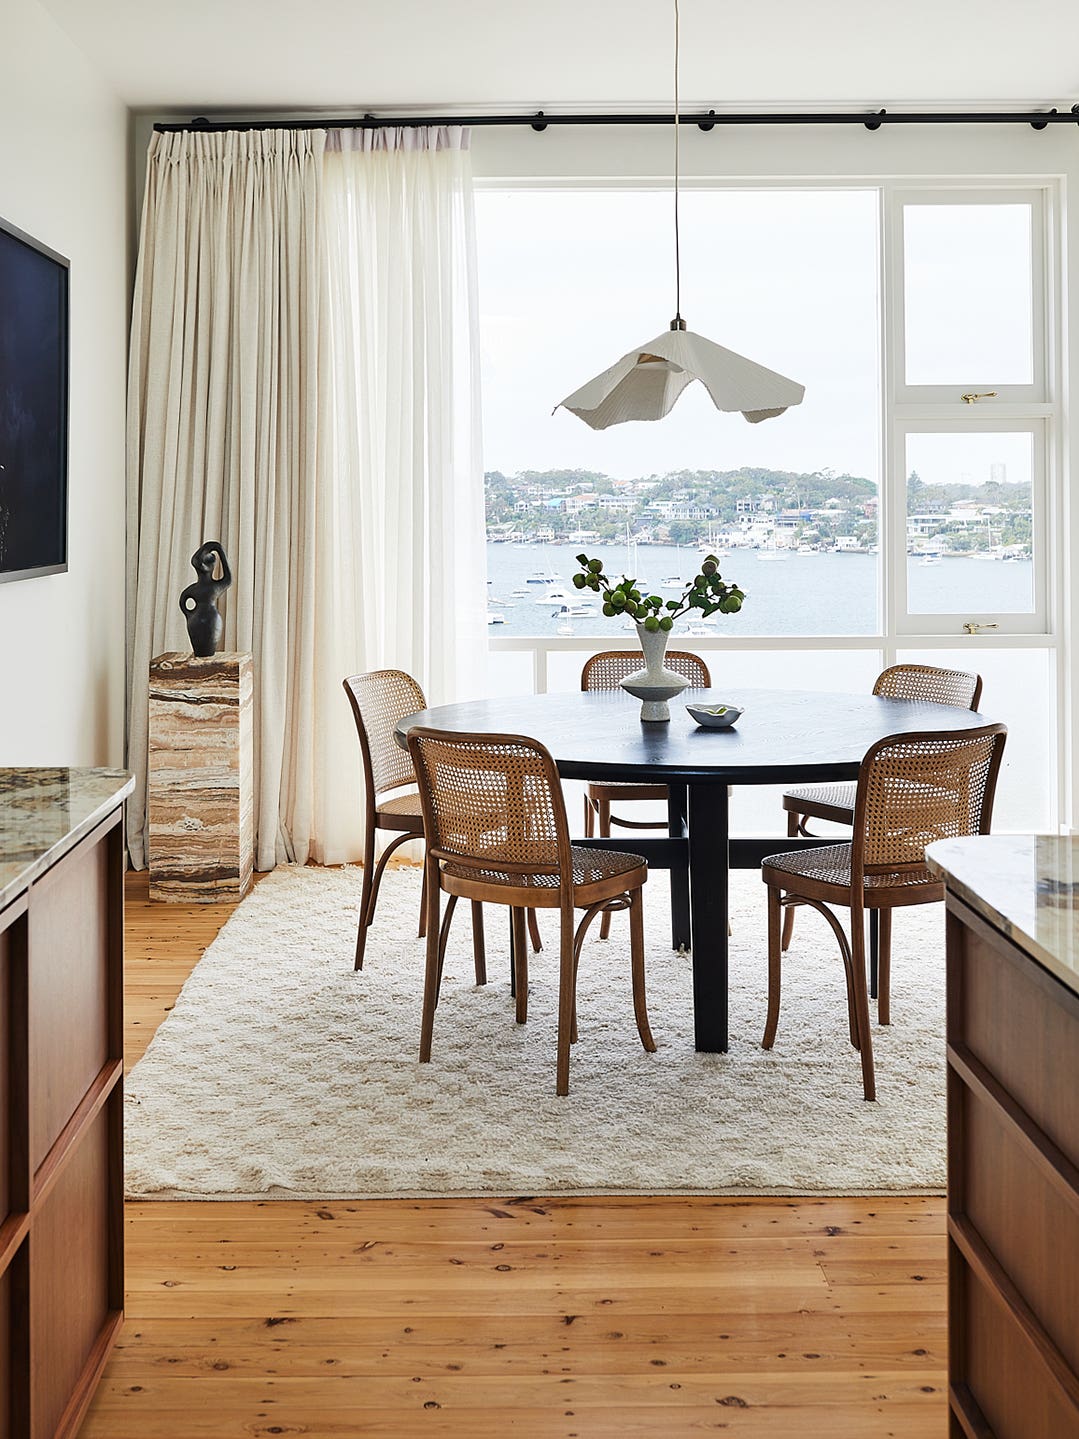 Boats Bob in the Background of This Sydney Home, But All Eyes Are on the Quartzite Kitchen Island